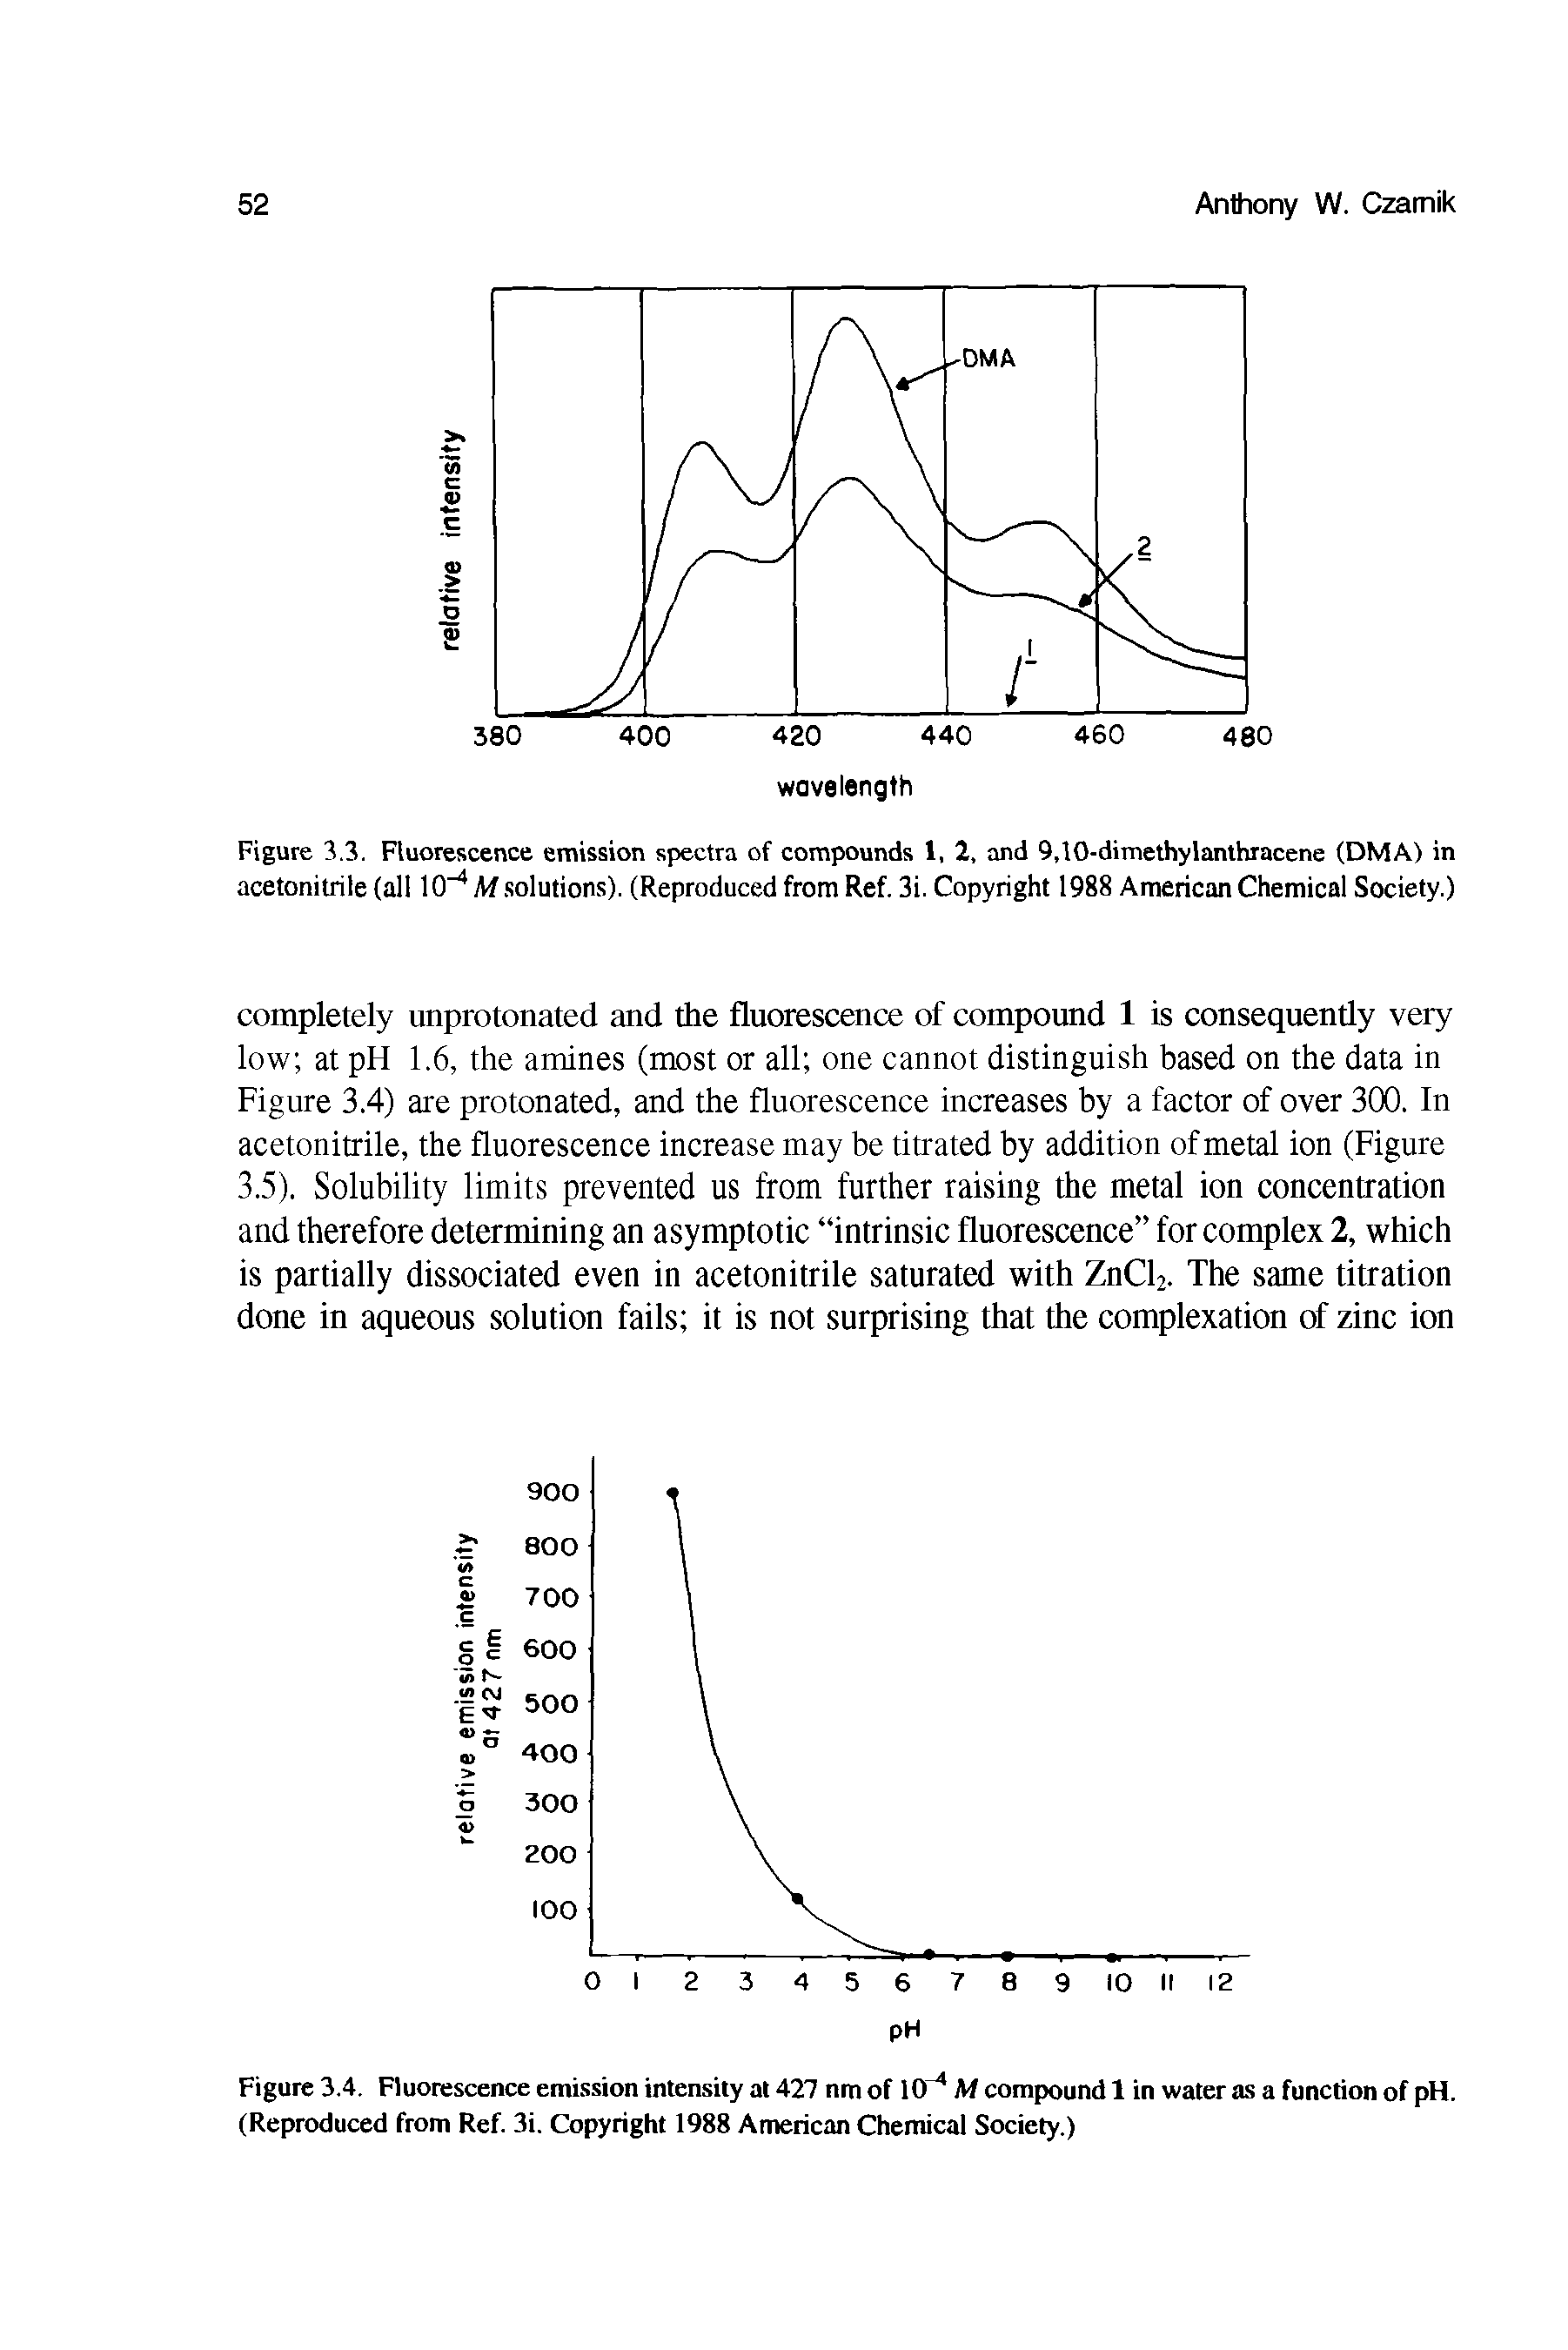 Figure 3.4. Fluorescence emission intensity at 427 nm of KT4 M compound 1 in water as a function of pH. (Reproduced from Ref. 3i. Copyright 1988 American Chemical Society.)...